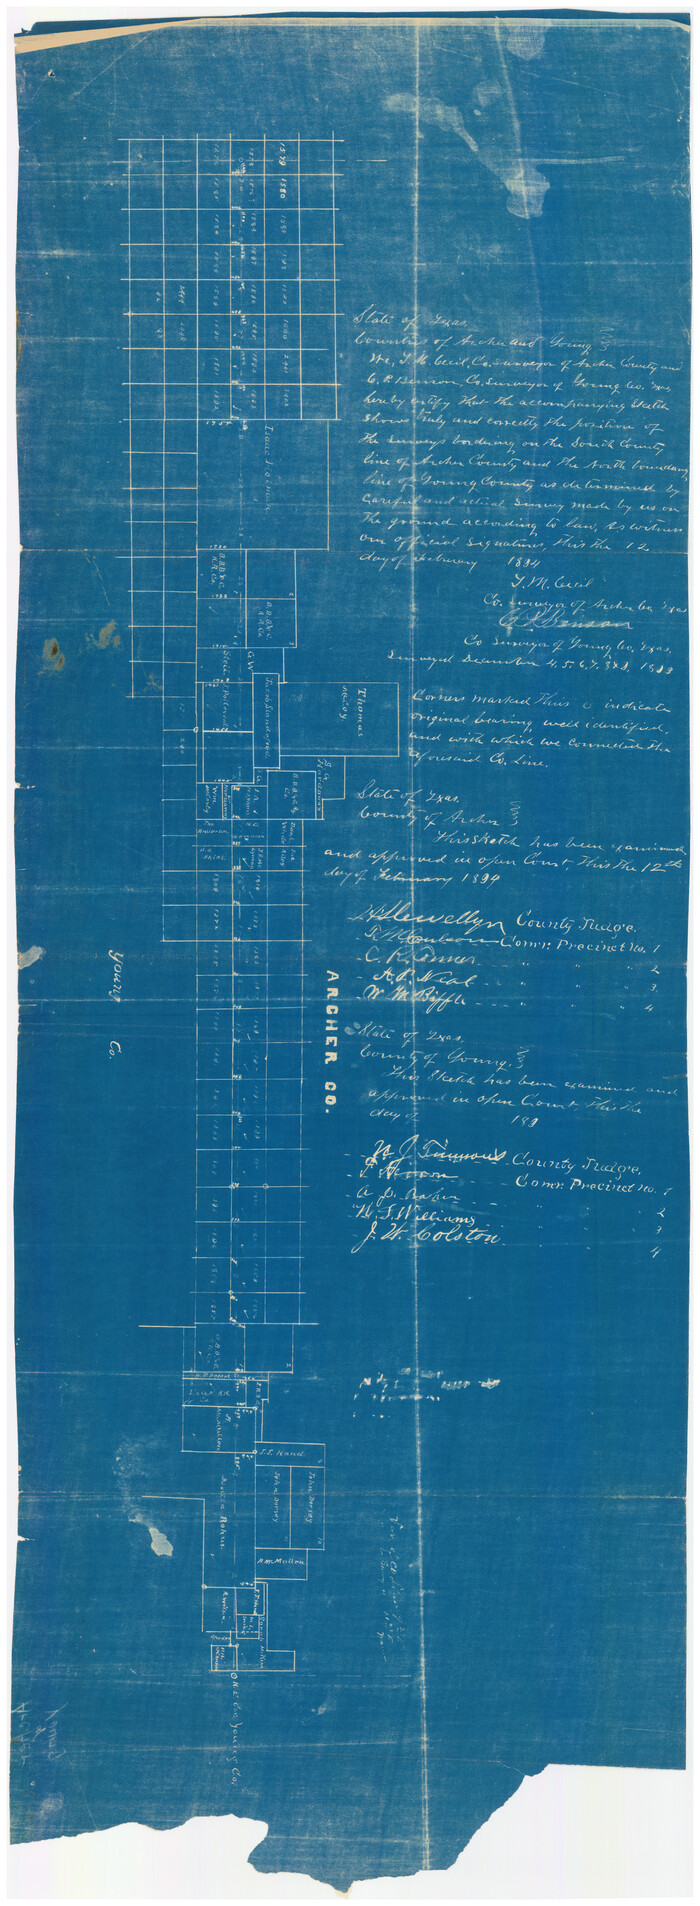 90174, [Sketch showing positions of surveys bordering on South boundary line of Archer County and North boundary line of Young County, Twichell Survey Records